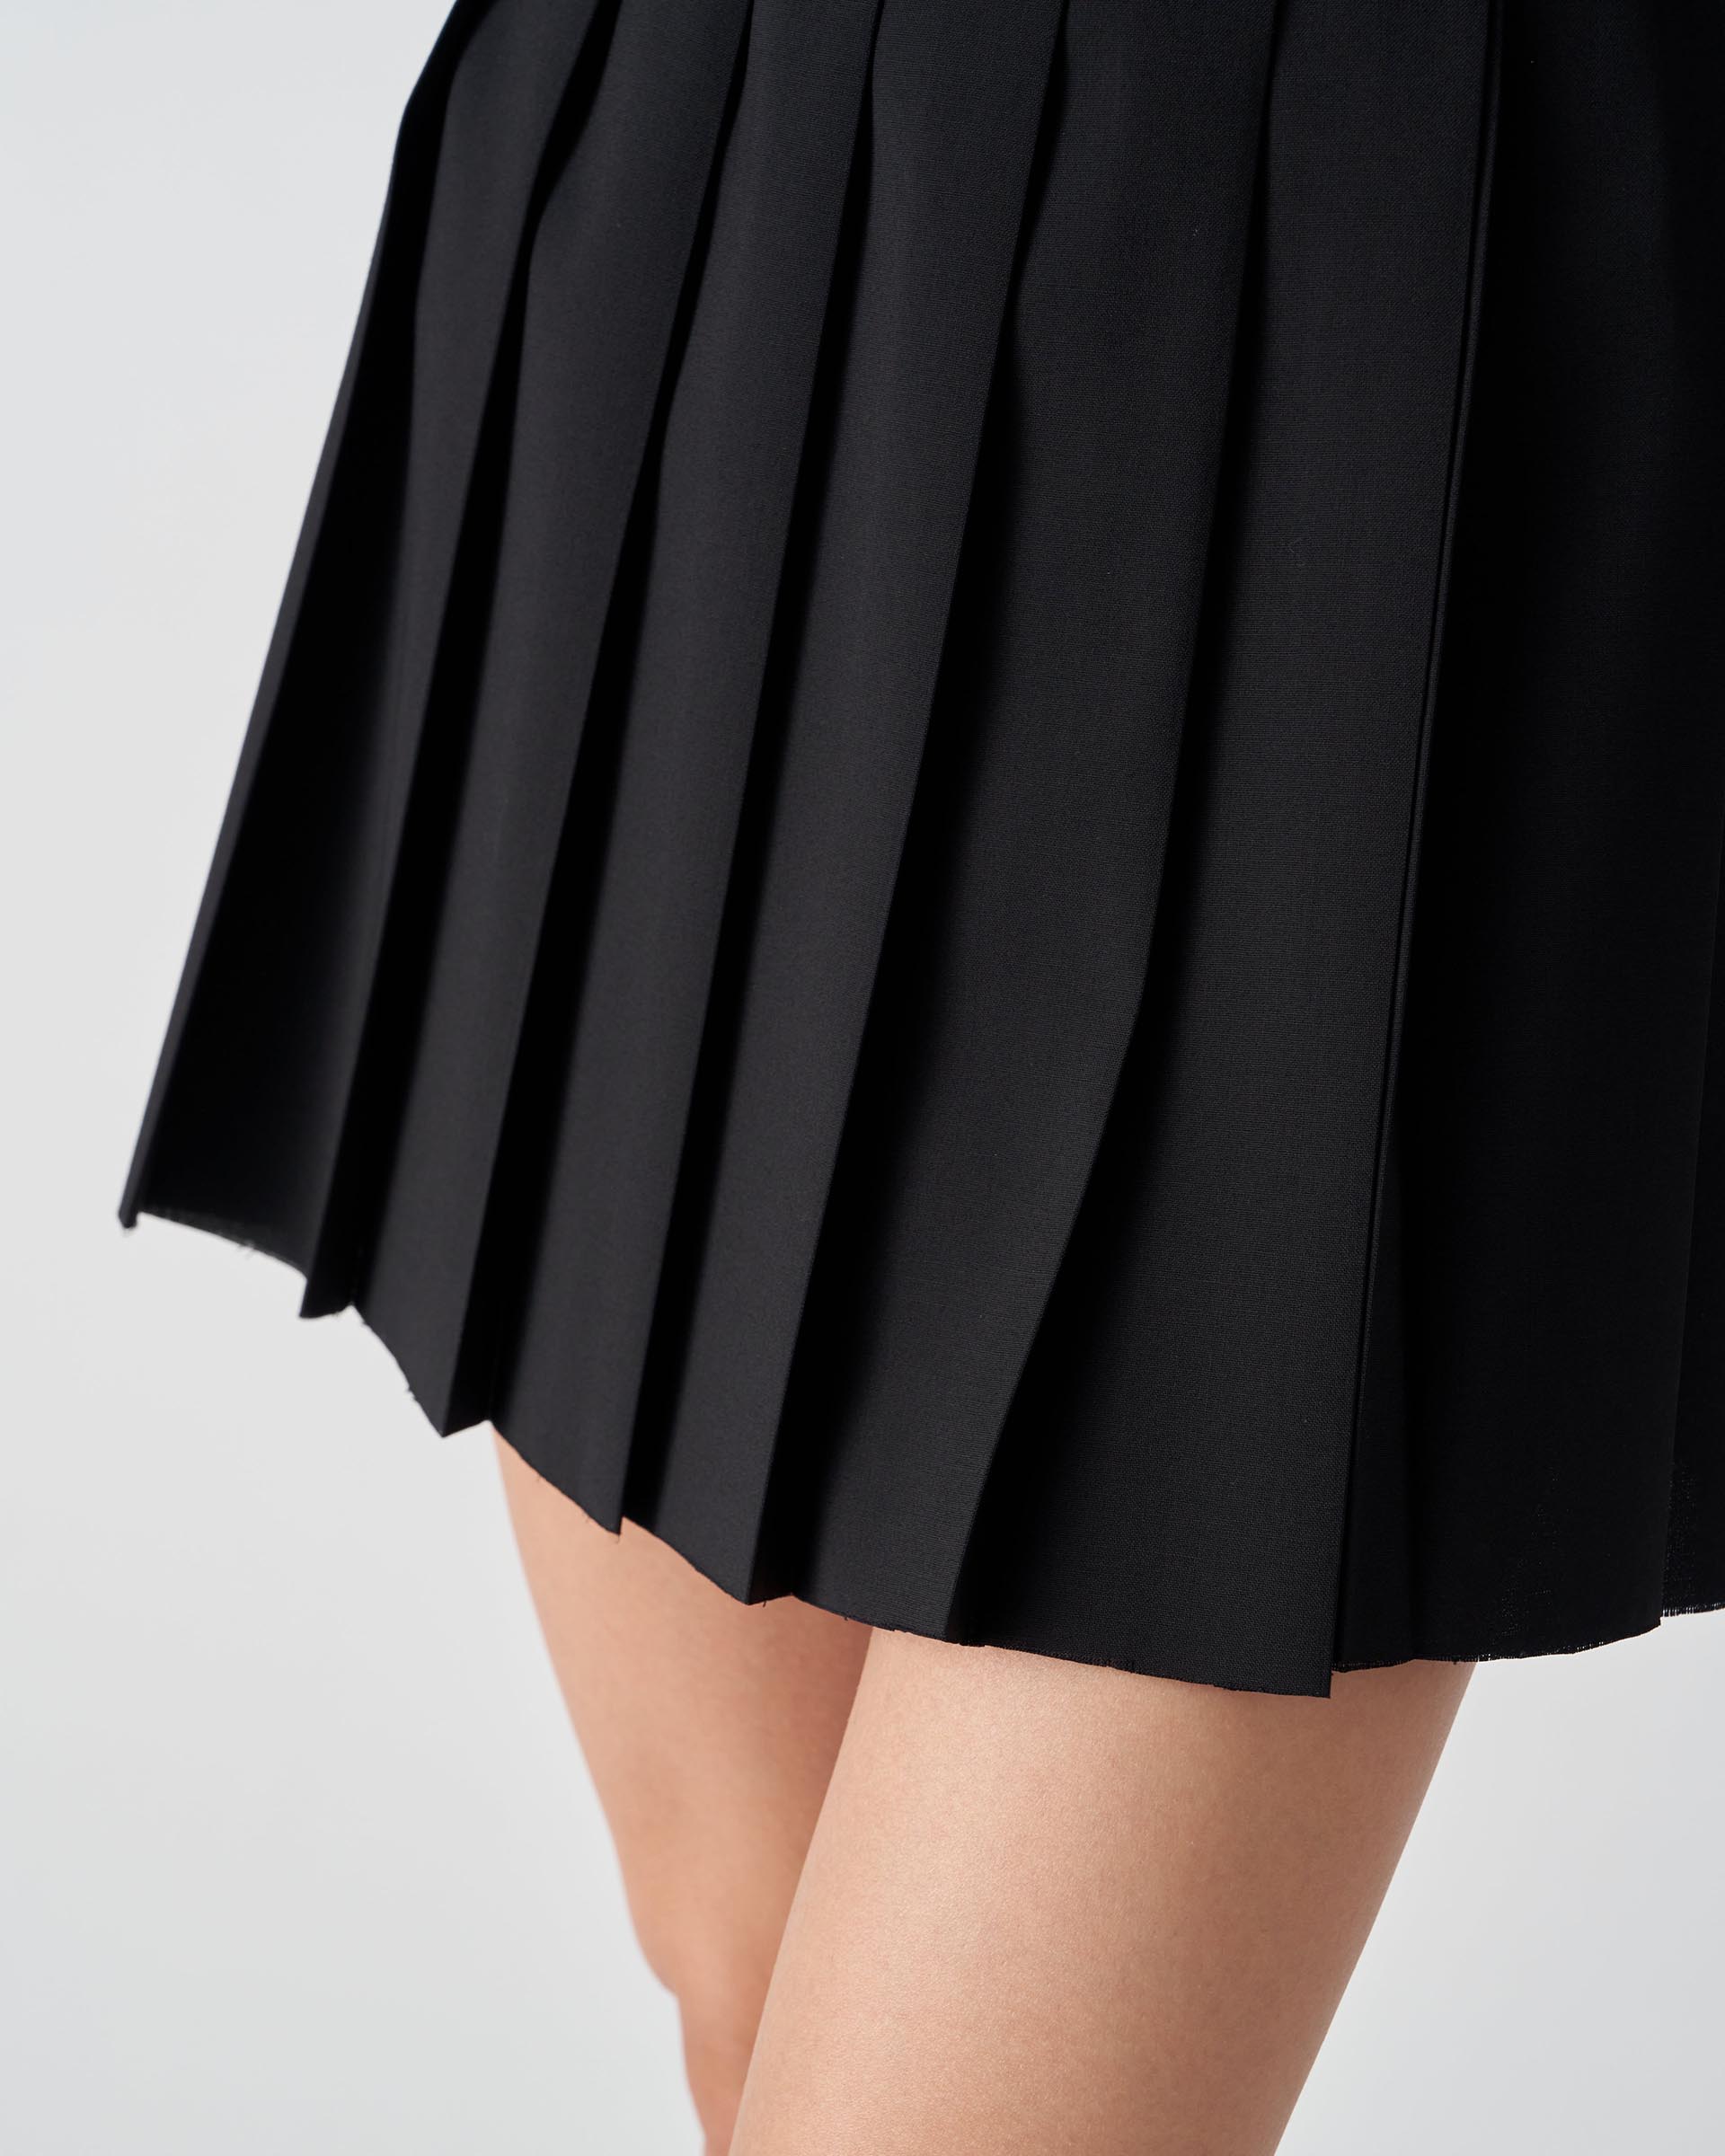 The Market Store | Pleated Skirt